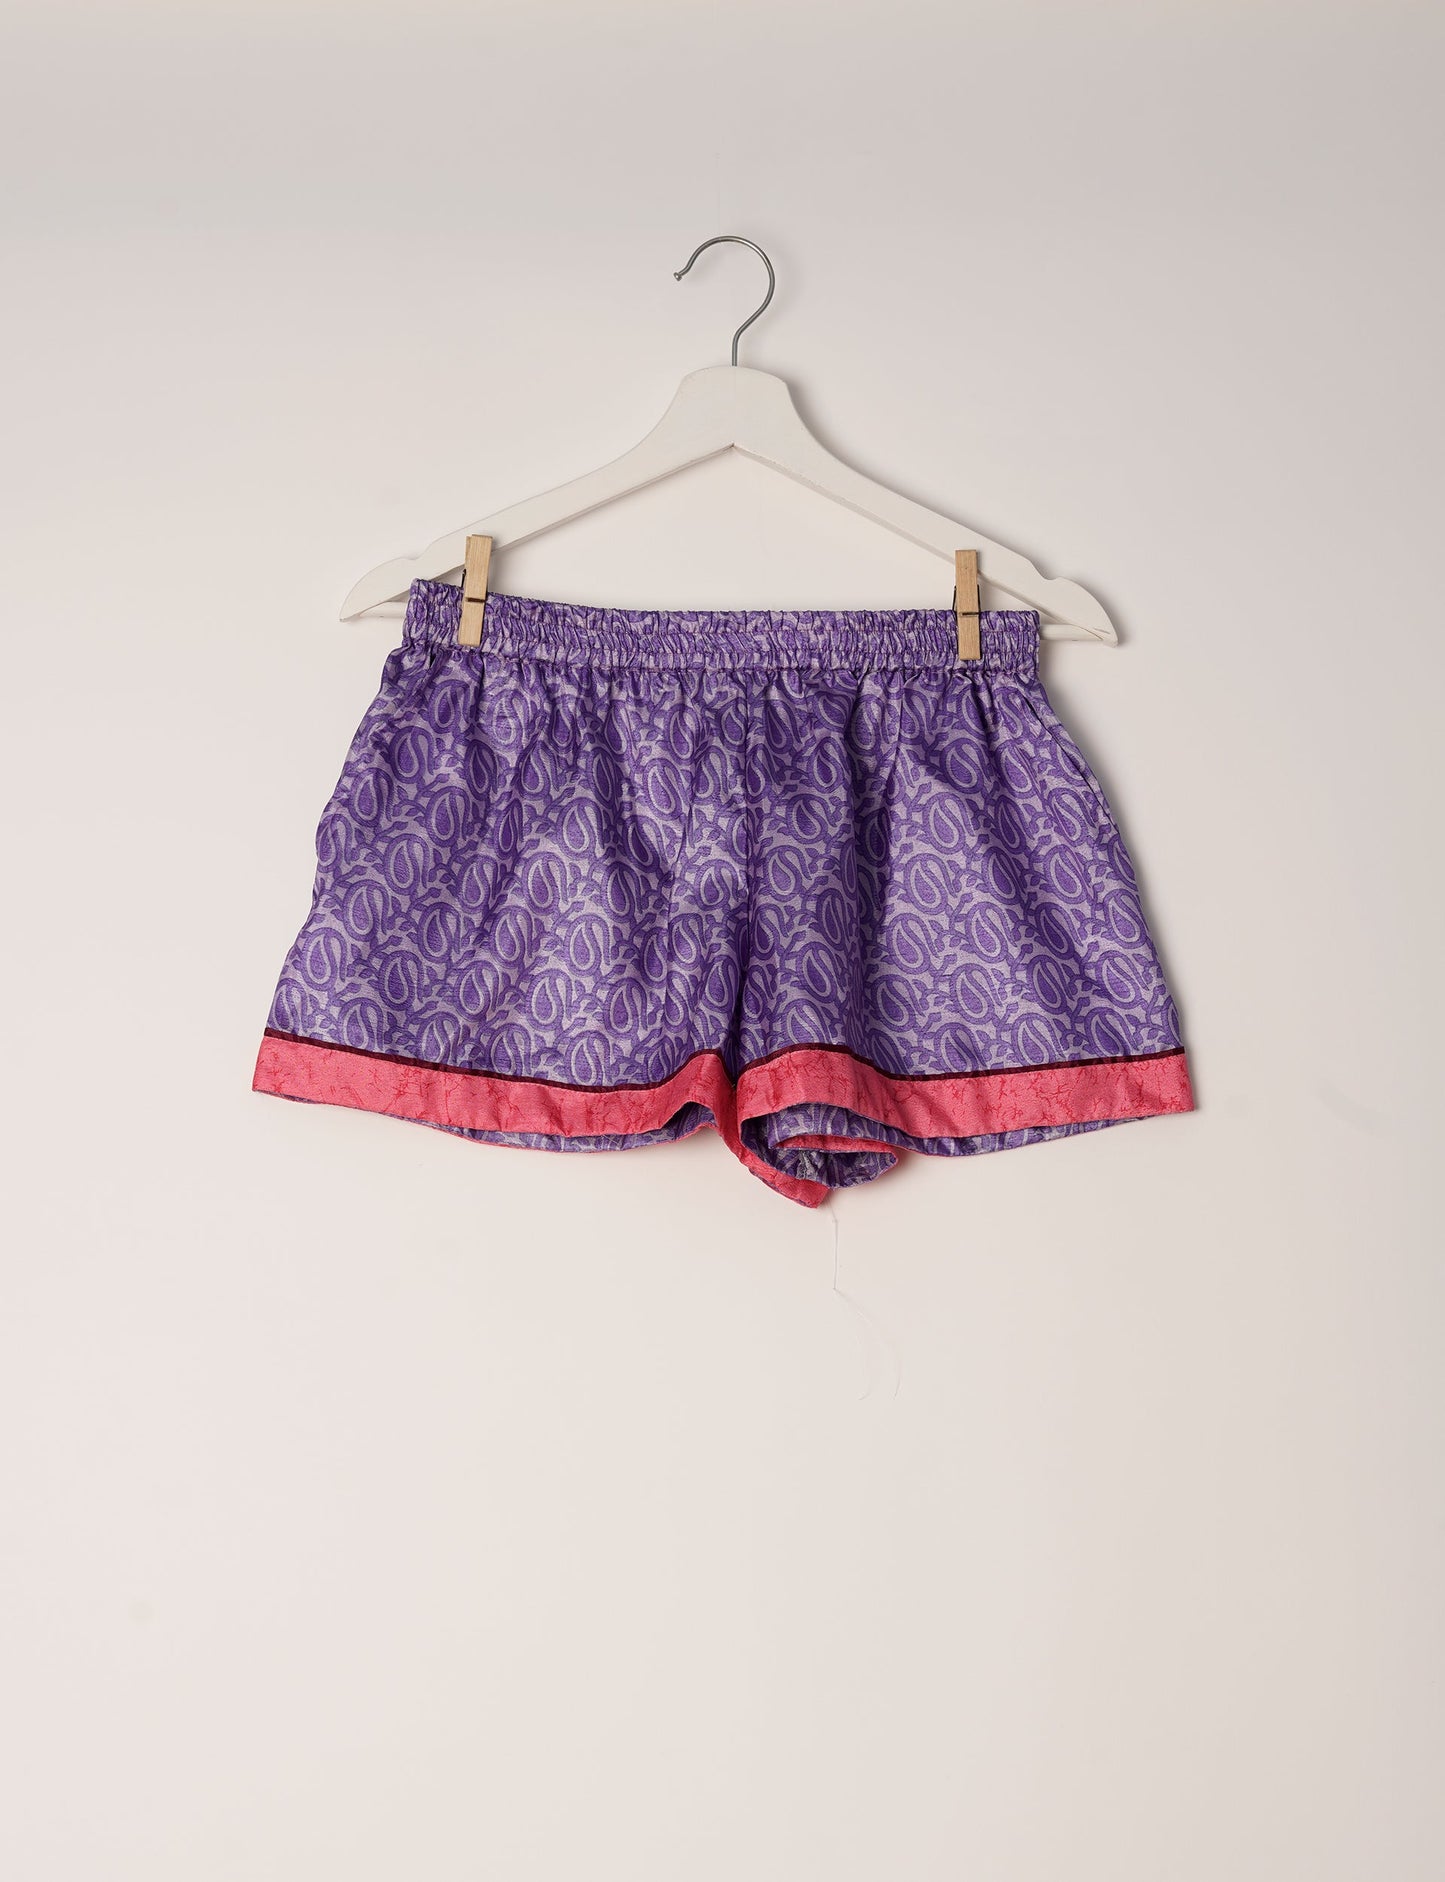 Indulge in comfort and style with our PJ Set Short, now with short sleeves. Crafted from upcycled saris, these shorts embody a zero-waste mentality for sustainable sleepwear. Versatile from day to night, perfect for beach lounging or poolside yoga, these pajamas redefine conscious fashion.